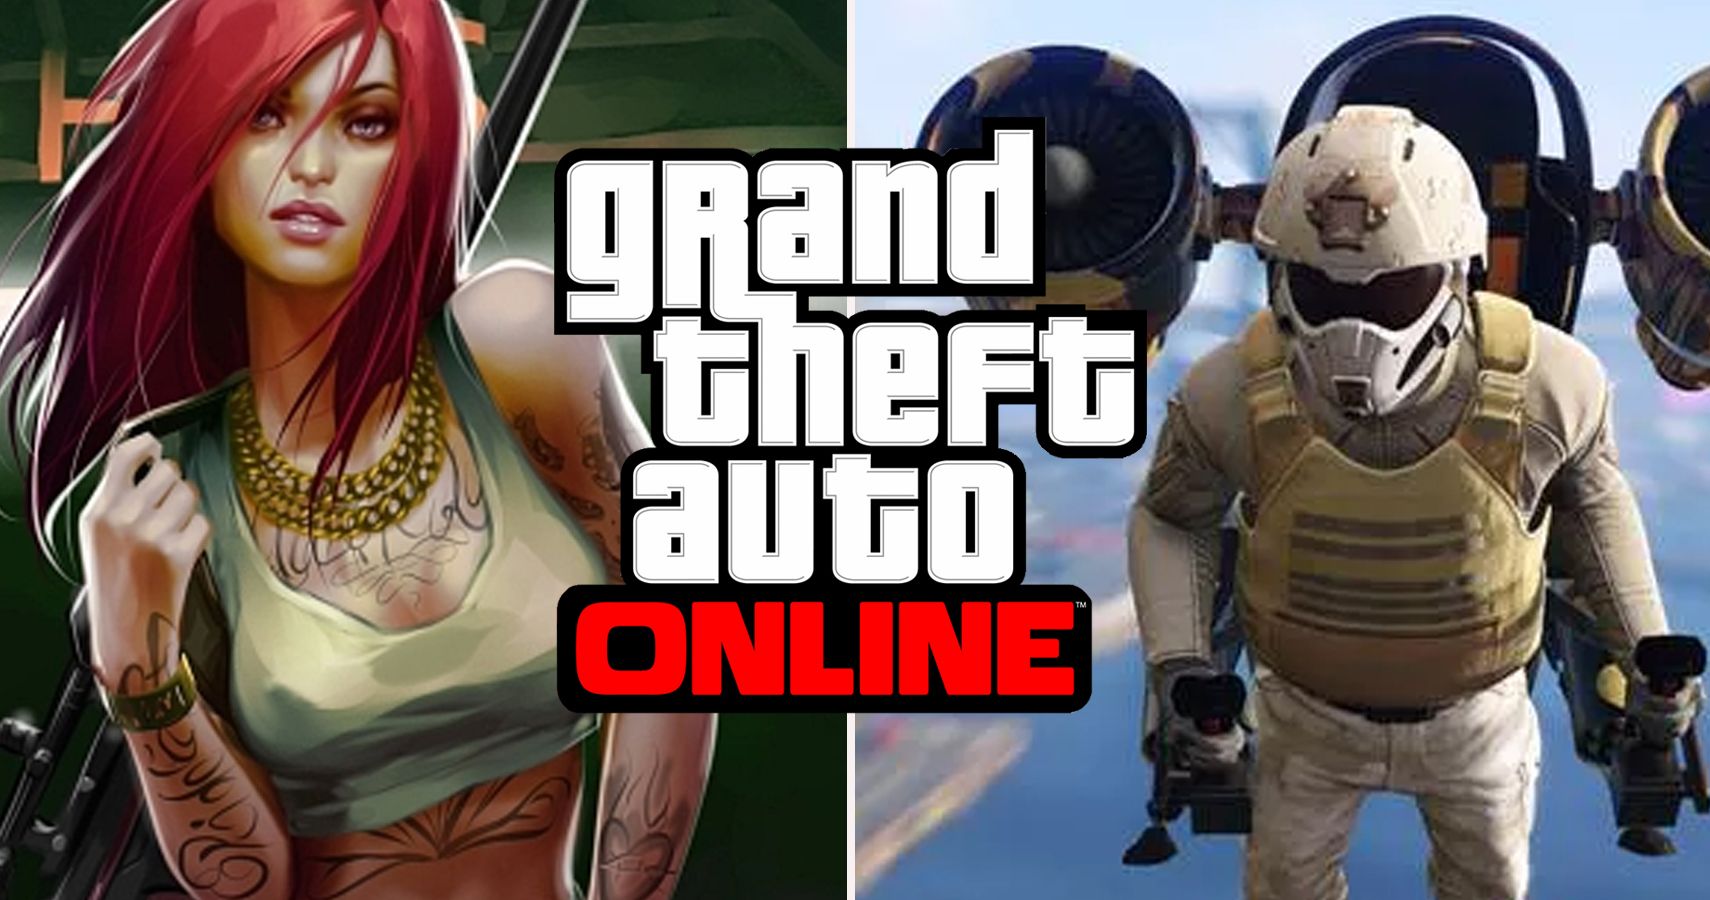 how to turn off passive mode in gta 5 pc